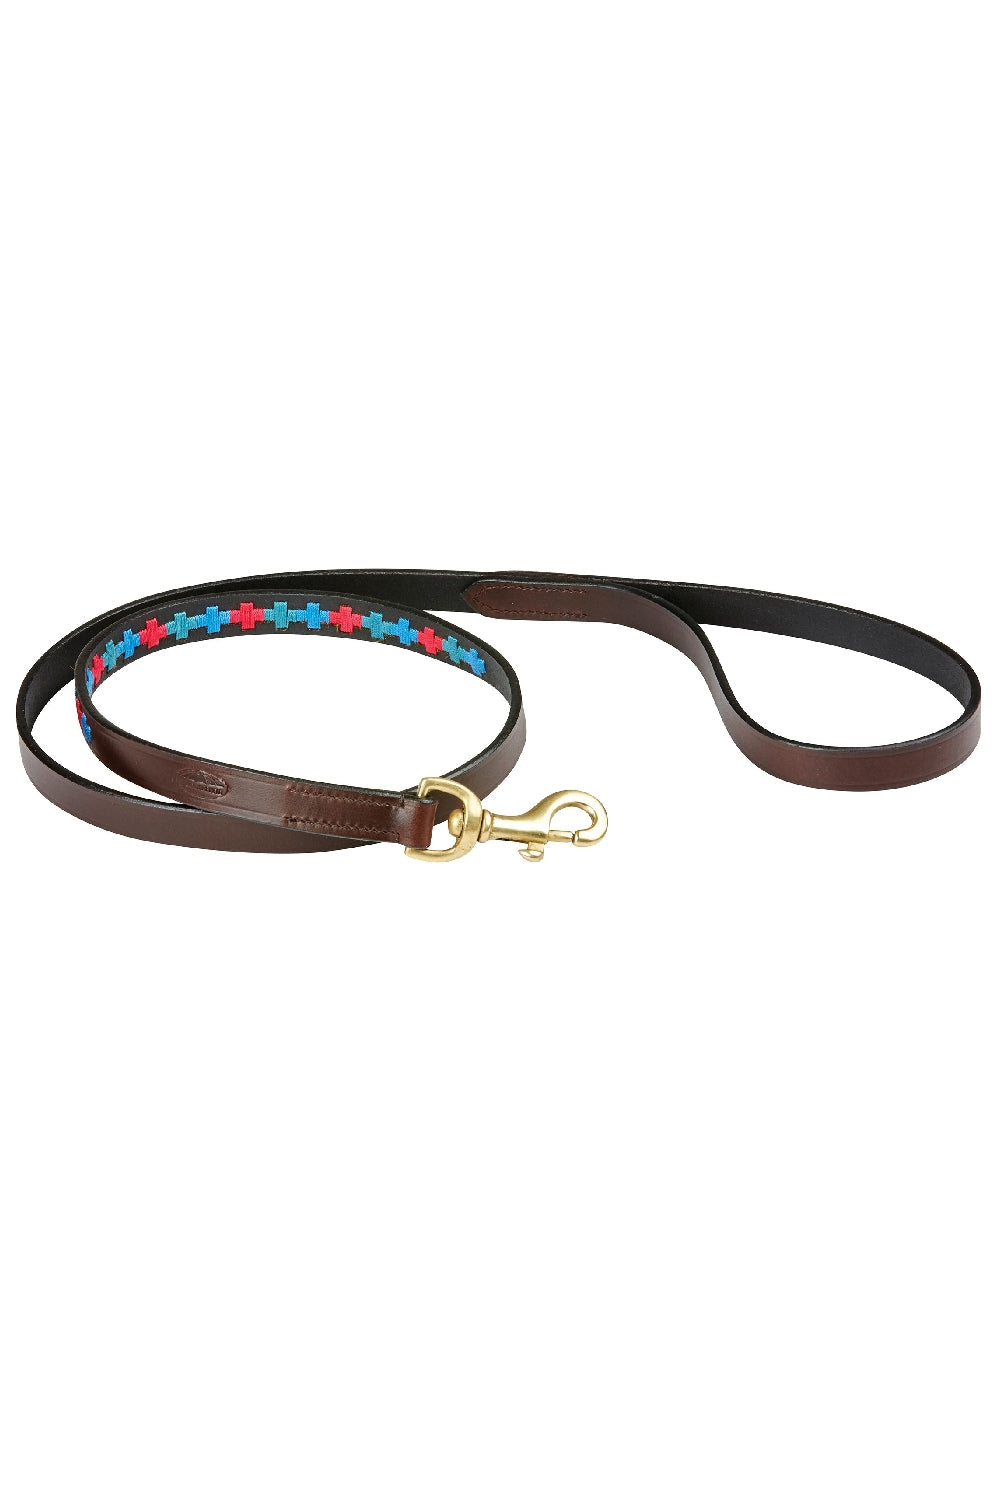 WeatherBeeta Polo Leather Dog Lead in Beaufort Brown/Emerald/Pink/Blue